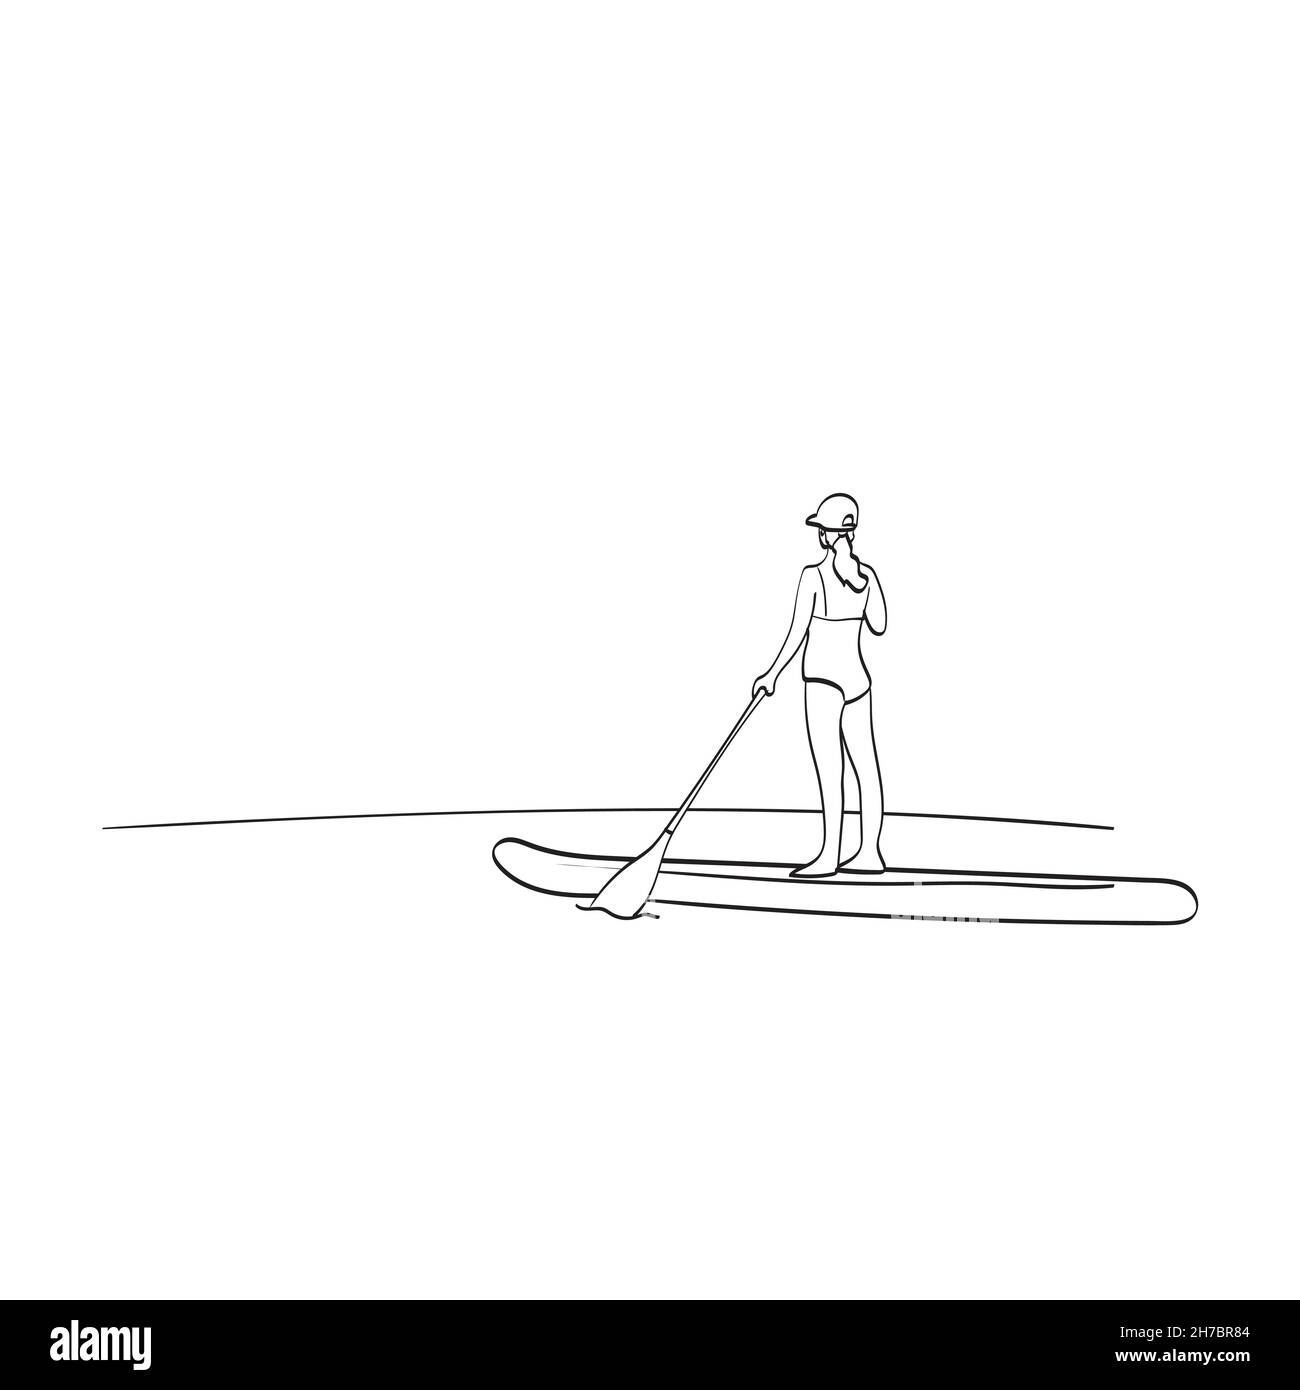 Stand up paddle board Stock Vector Images - Alamy